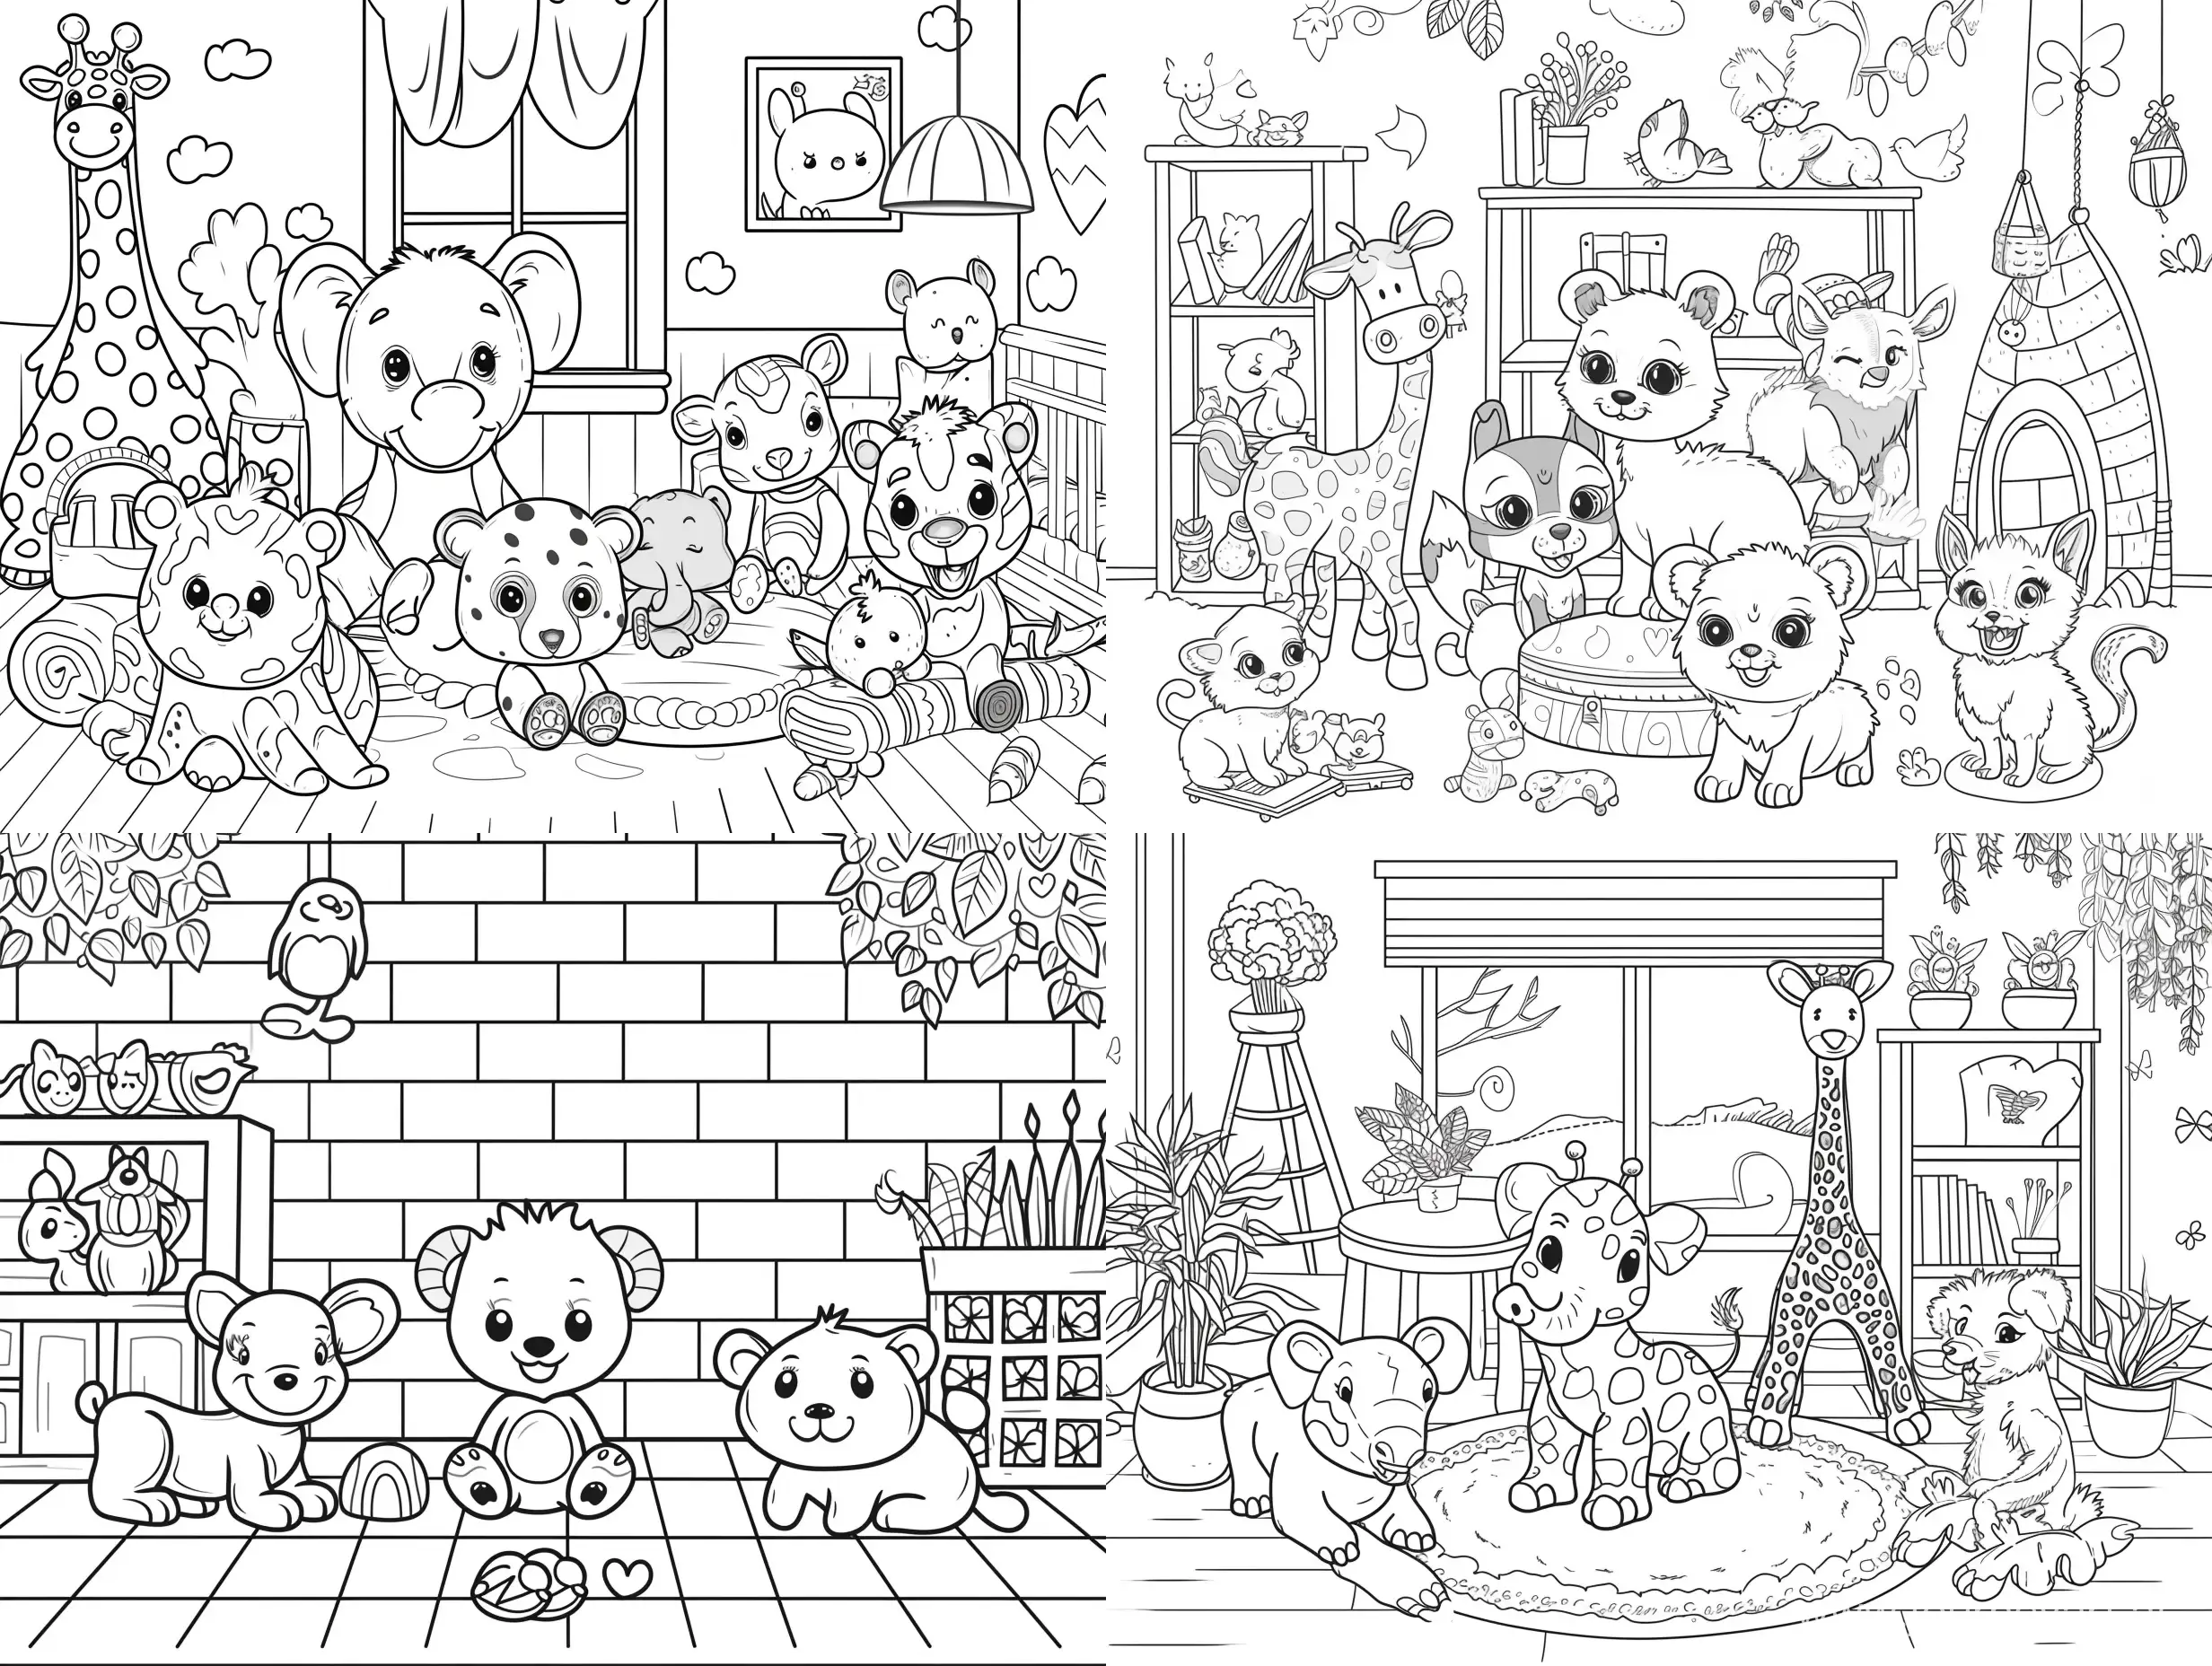 coloring page for kids, detailed, simply cartoon style, isolated, funny, happy animals in playroom